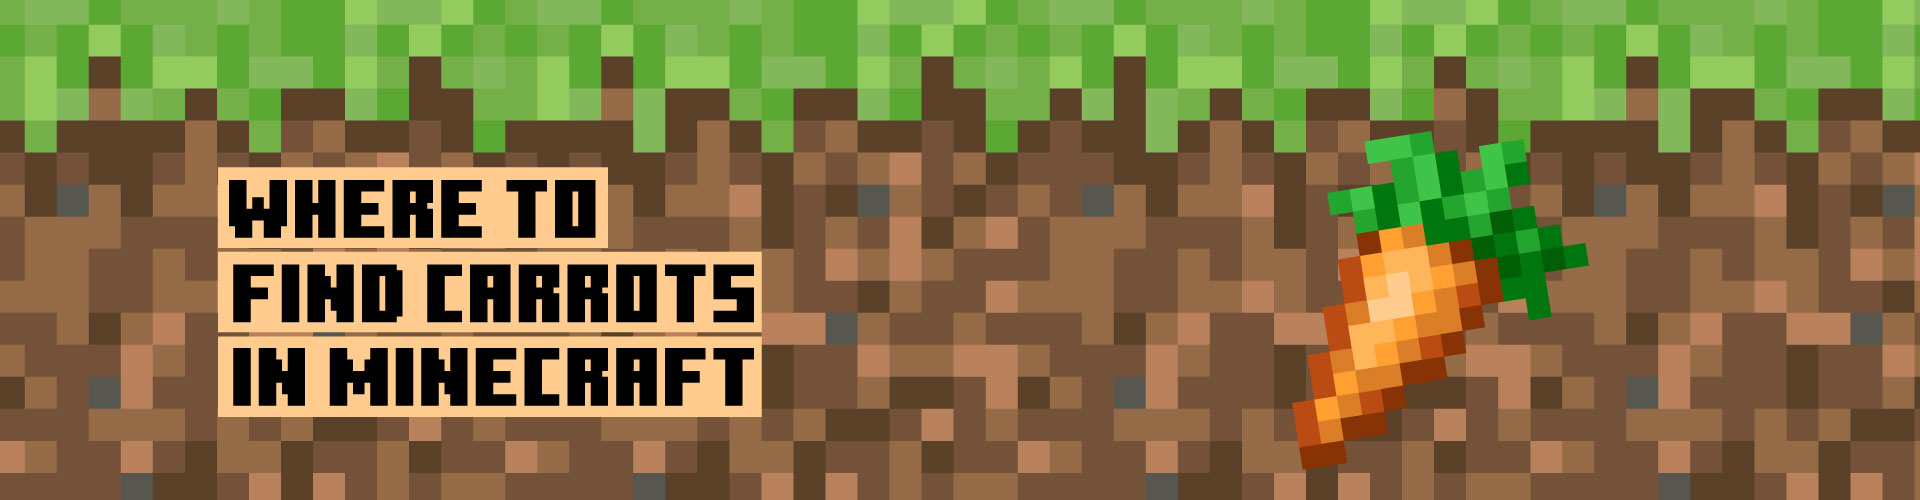 where-to-find-carrots-in-minecraft